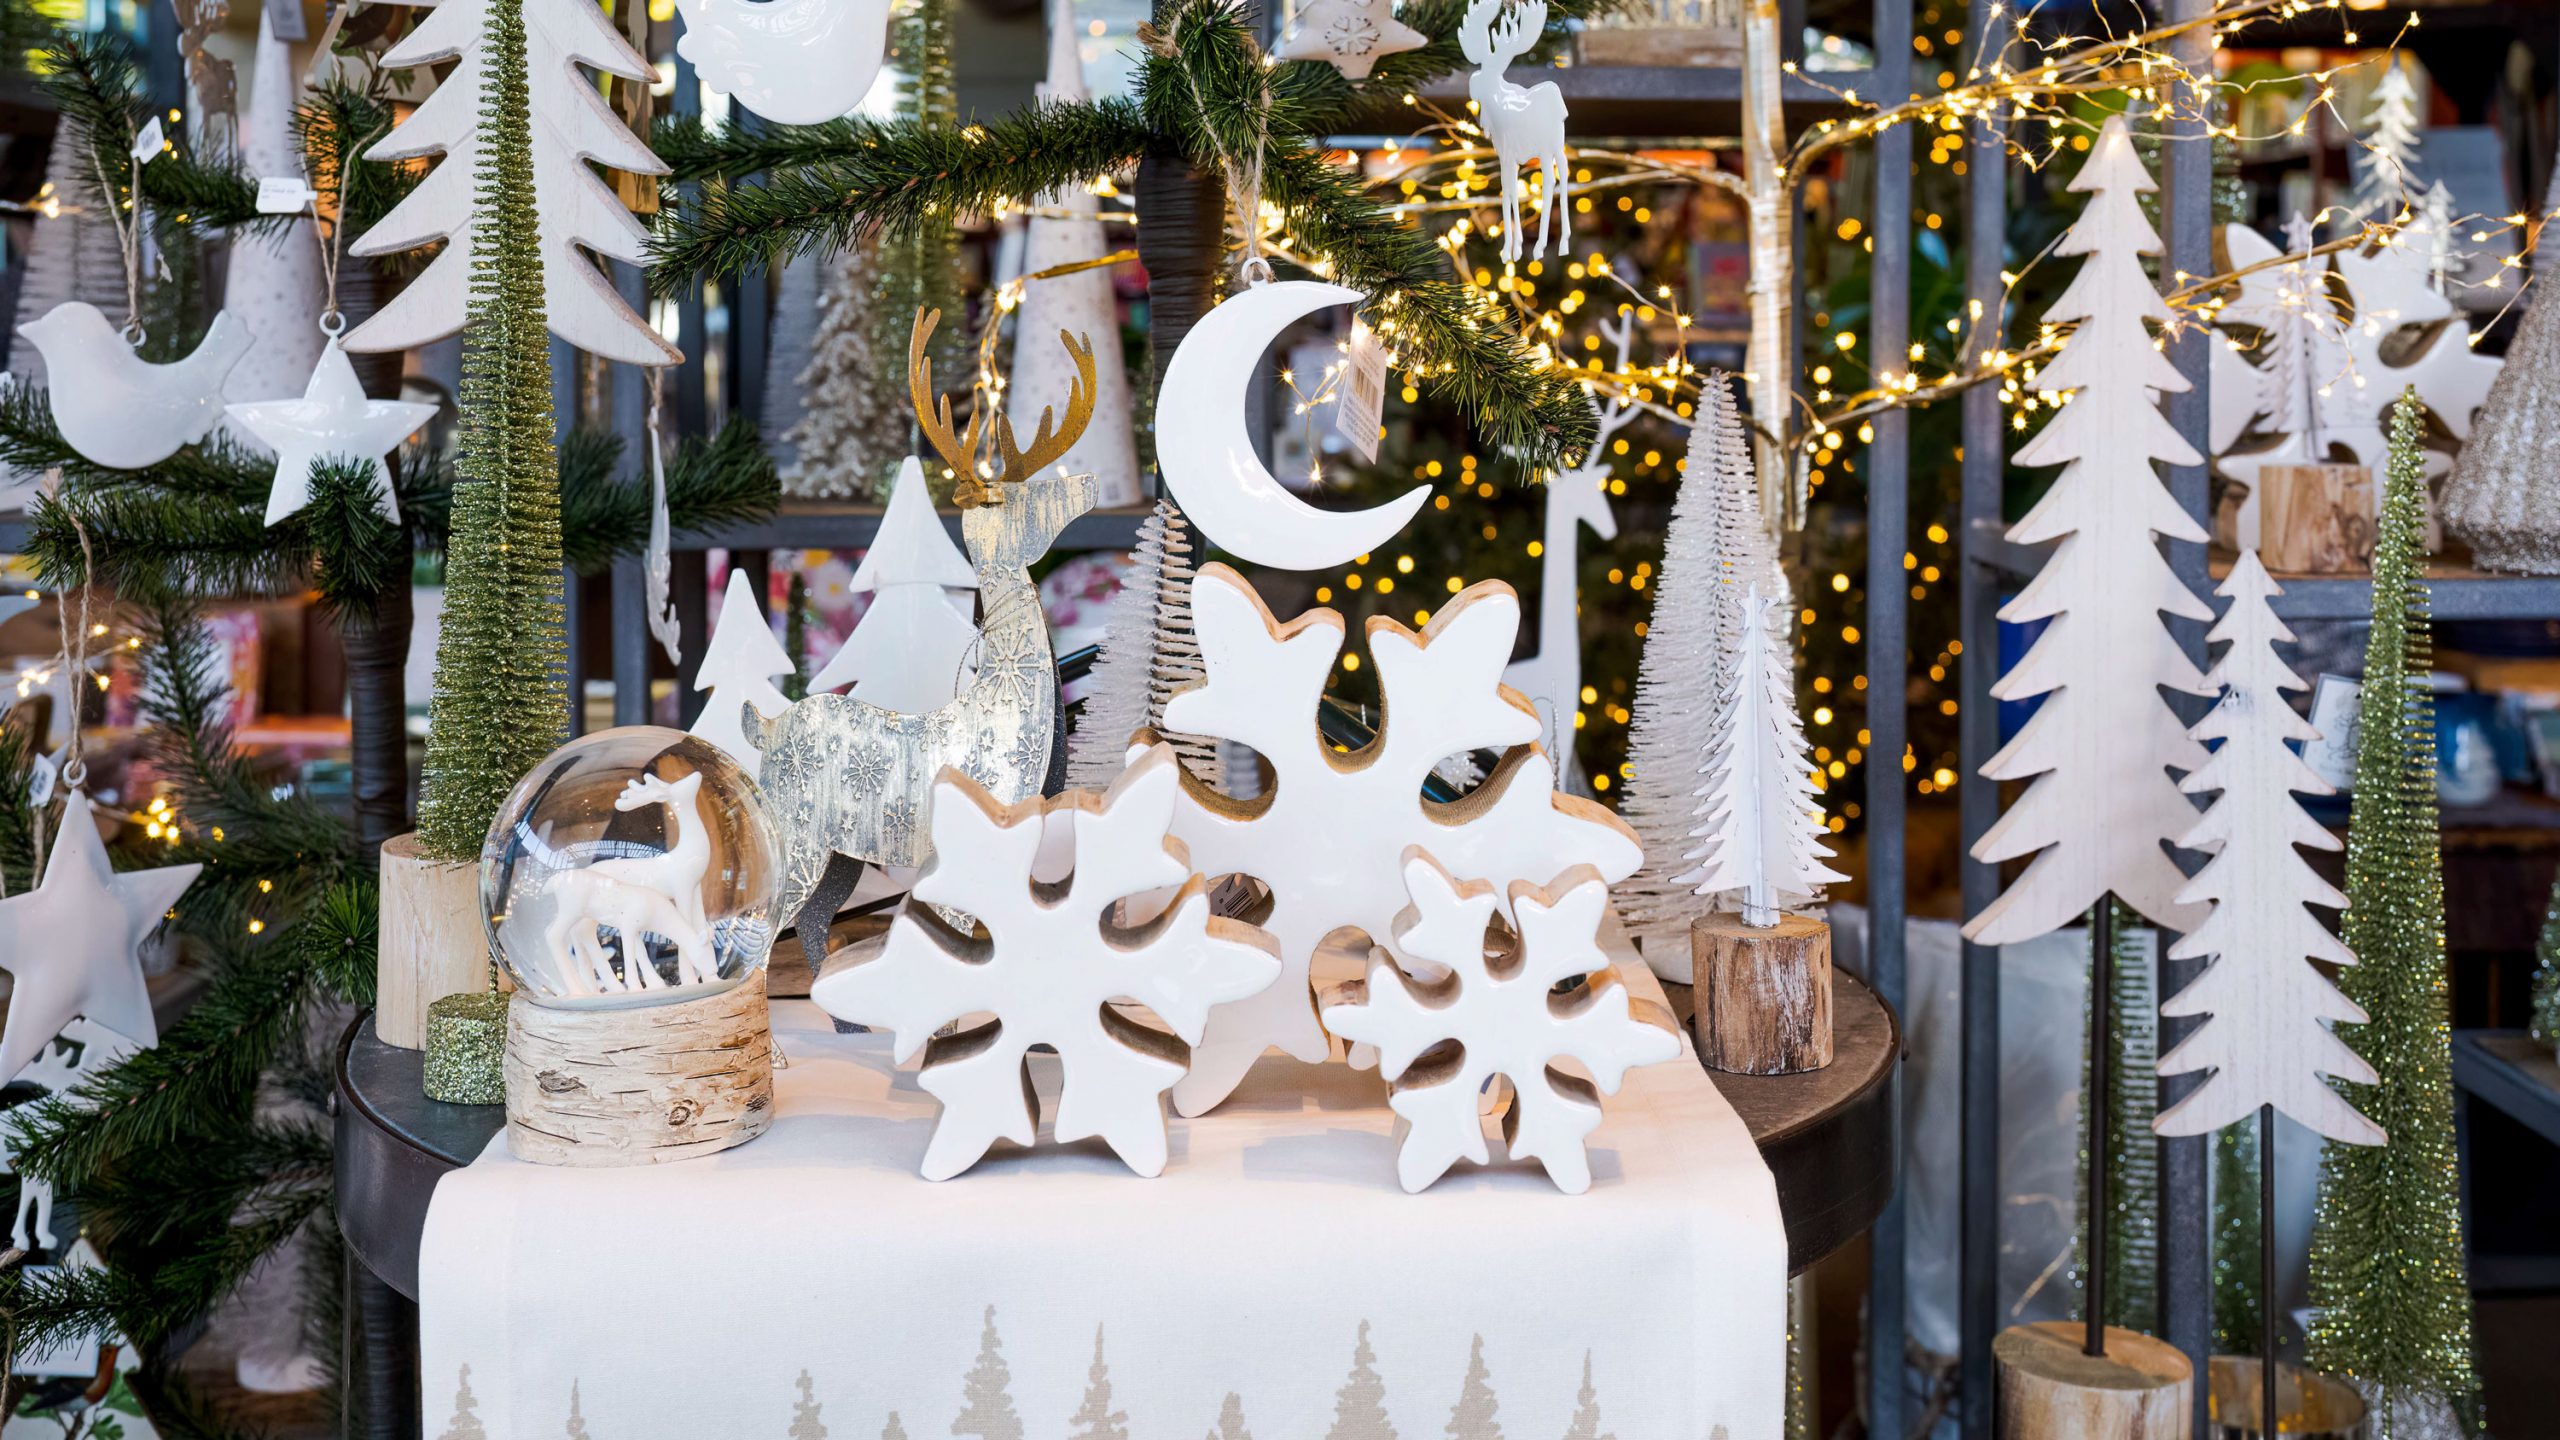 Holiday items in the shop, including a snowglobe, snowflake decorations, and small trees.